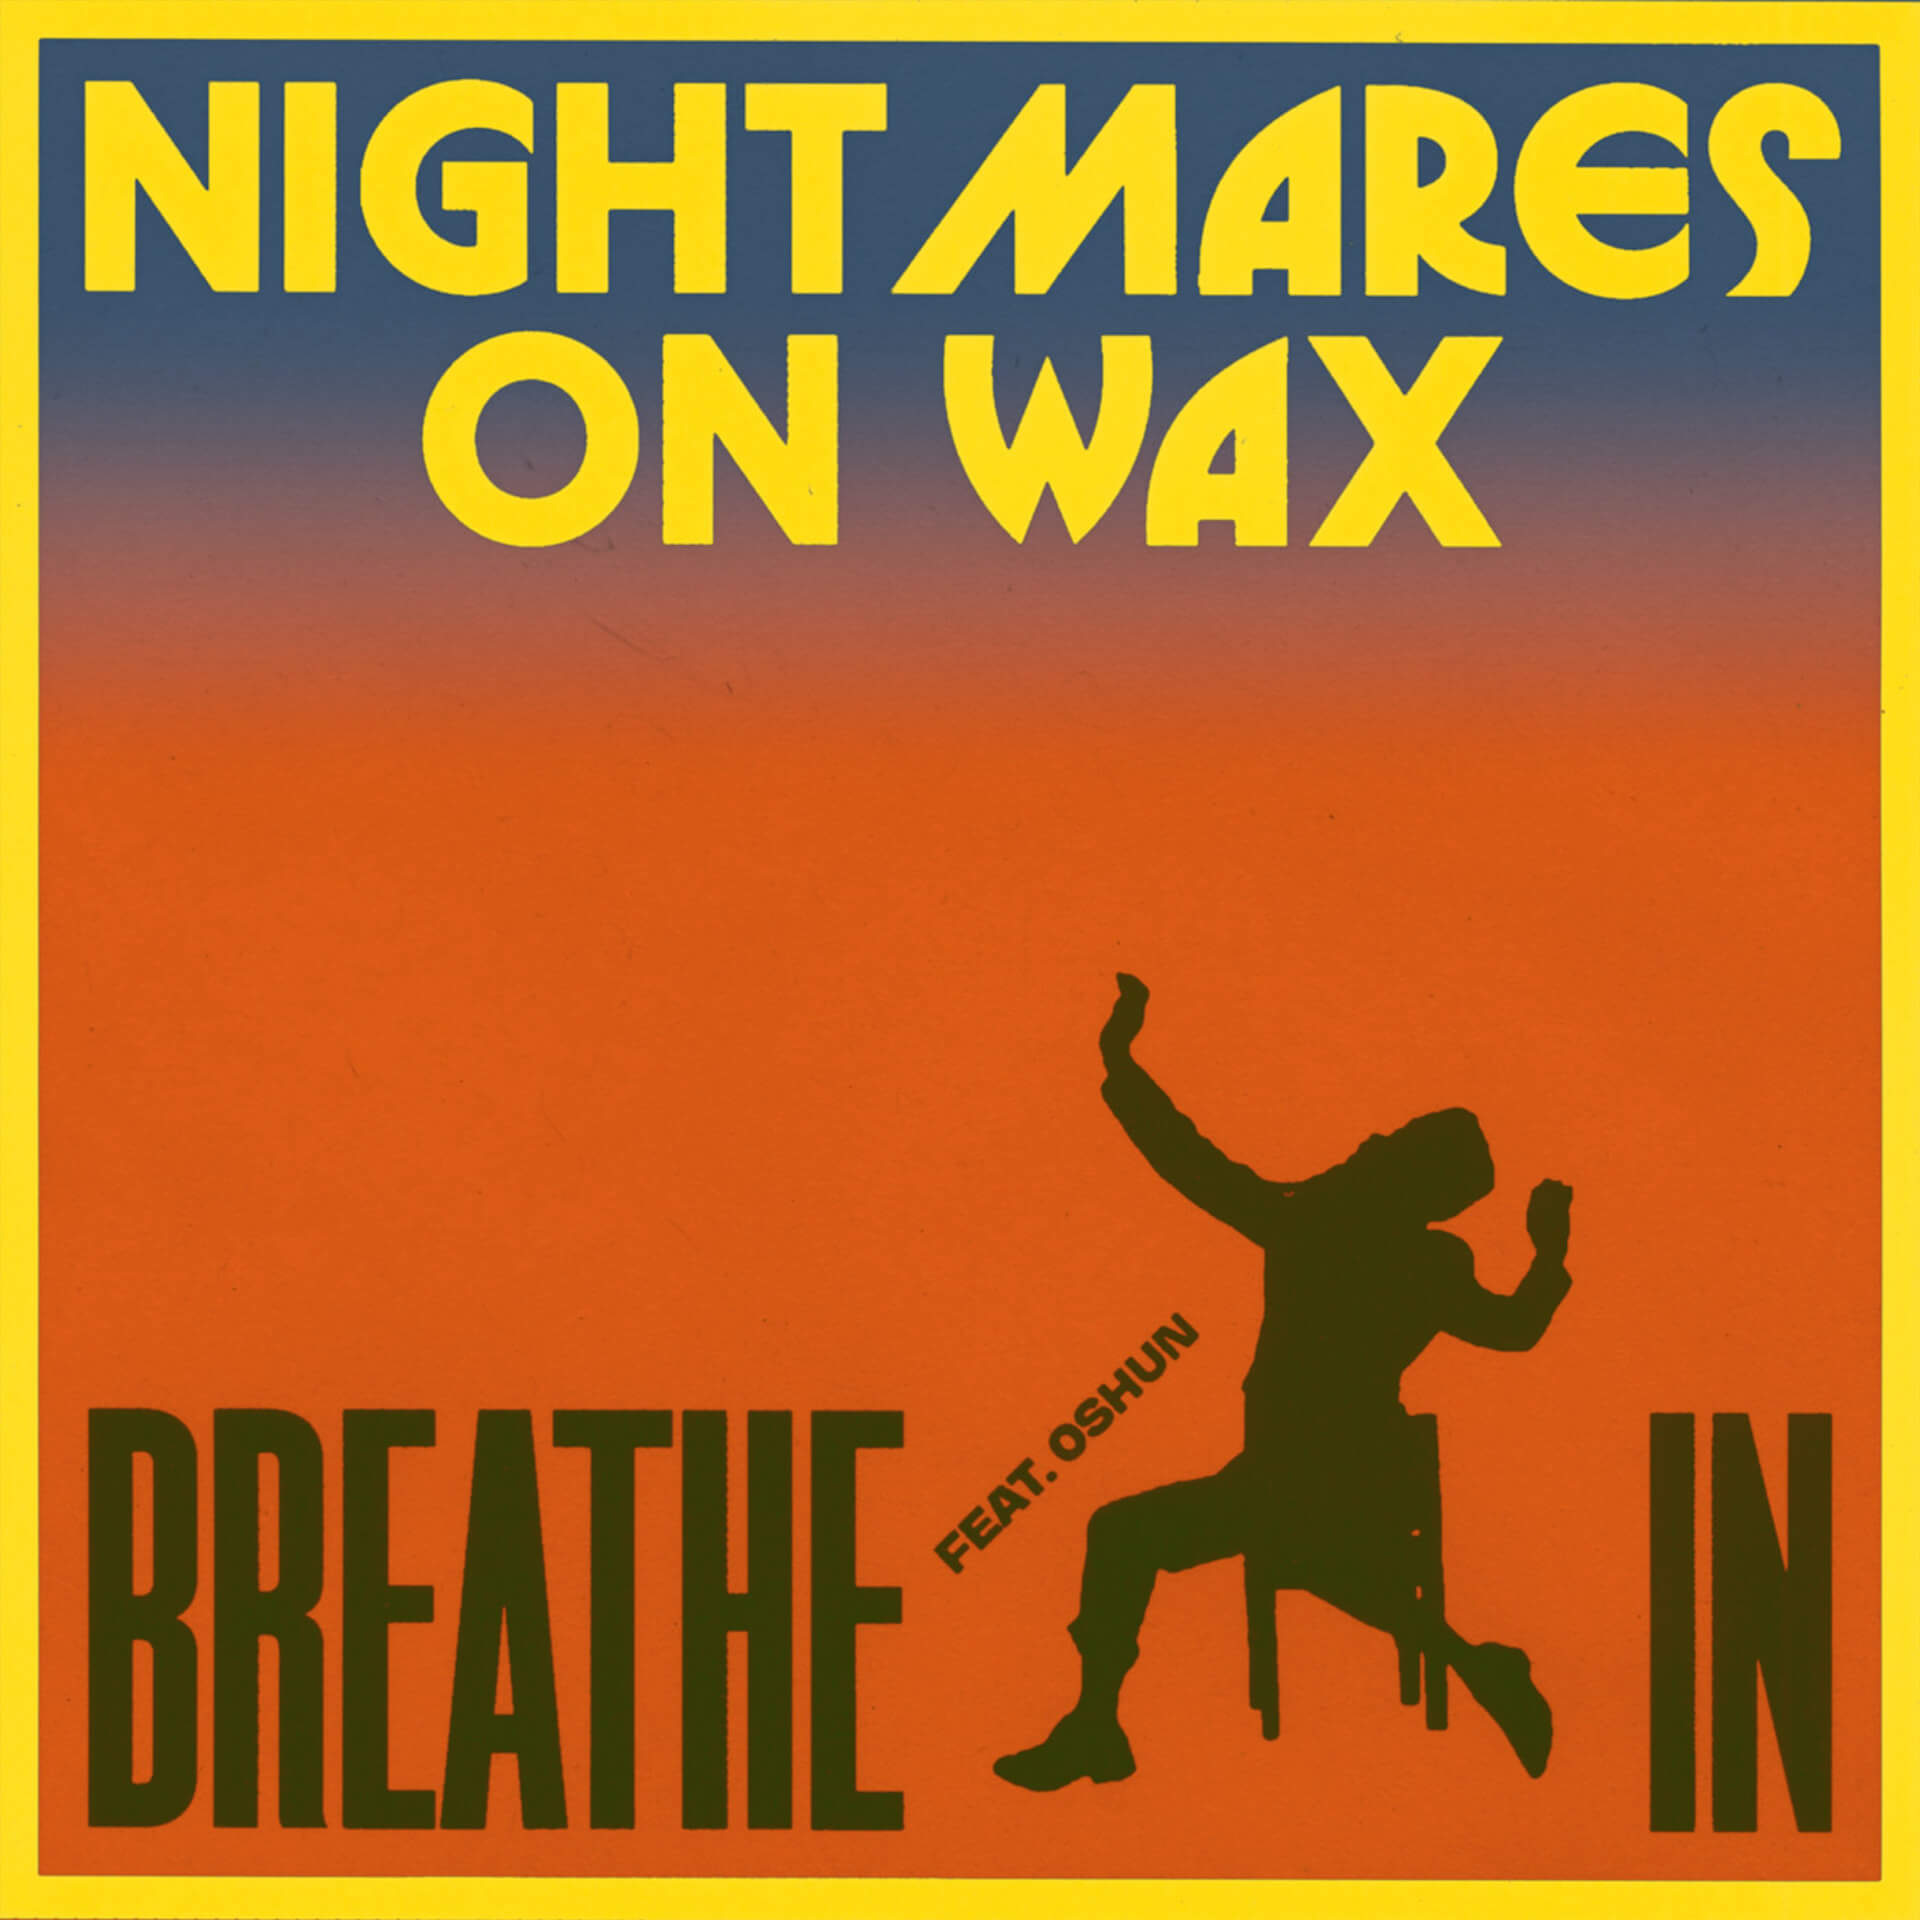 Nightmares On Waxの最新アルバム『SHOUT OUT！ TO FREEDOM…』から新曲“BREATHE IN”が解禁！ music211007_nightmares_on_wax_05